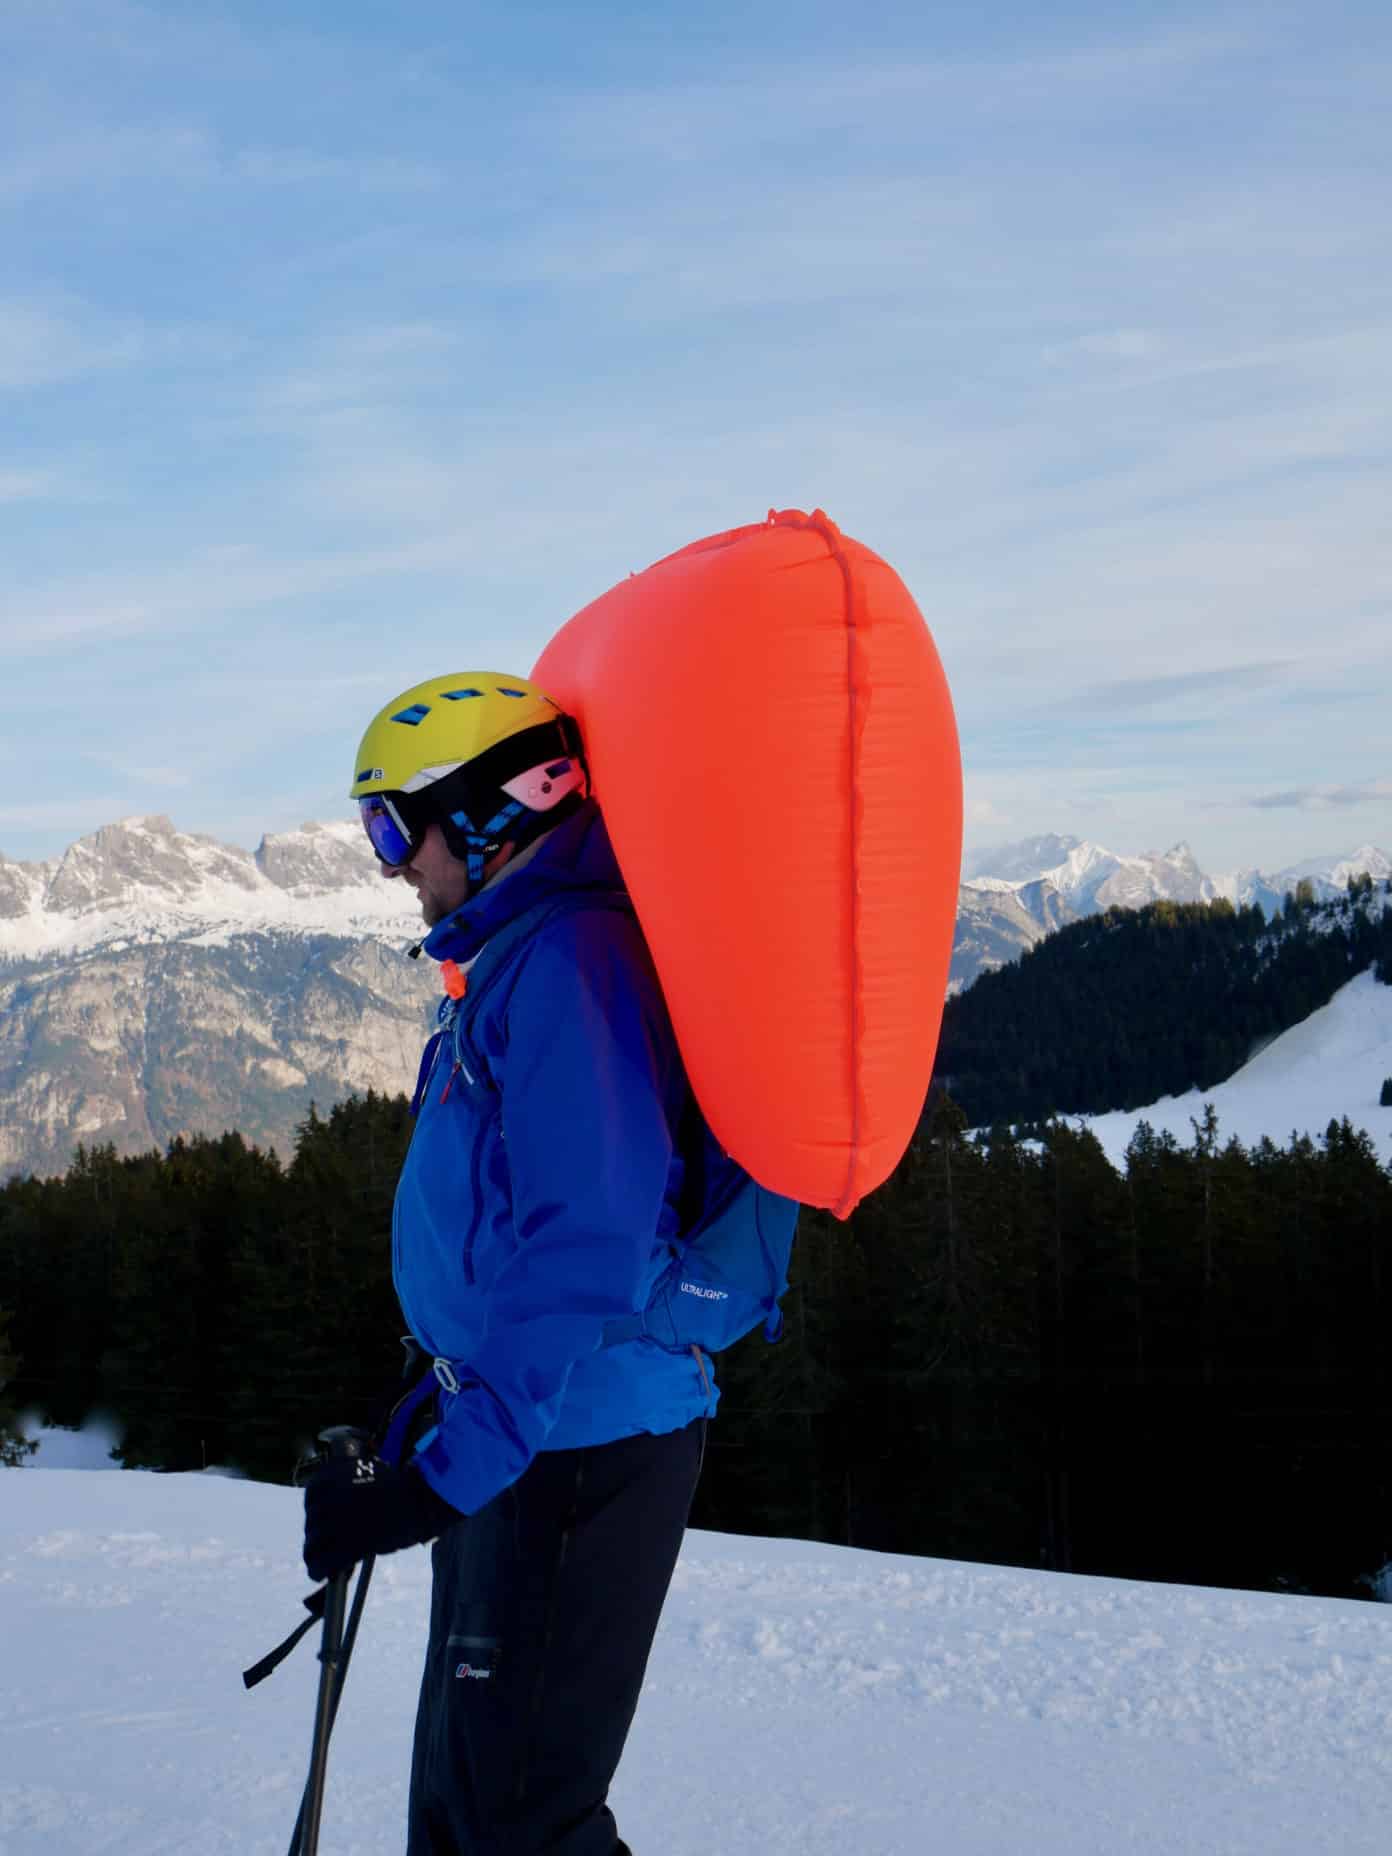 Review Mammut Ultralight Removable Airbag 3.0
